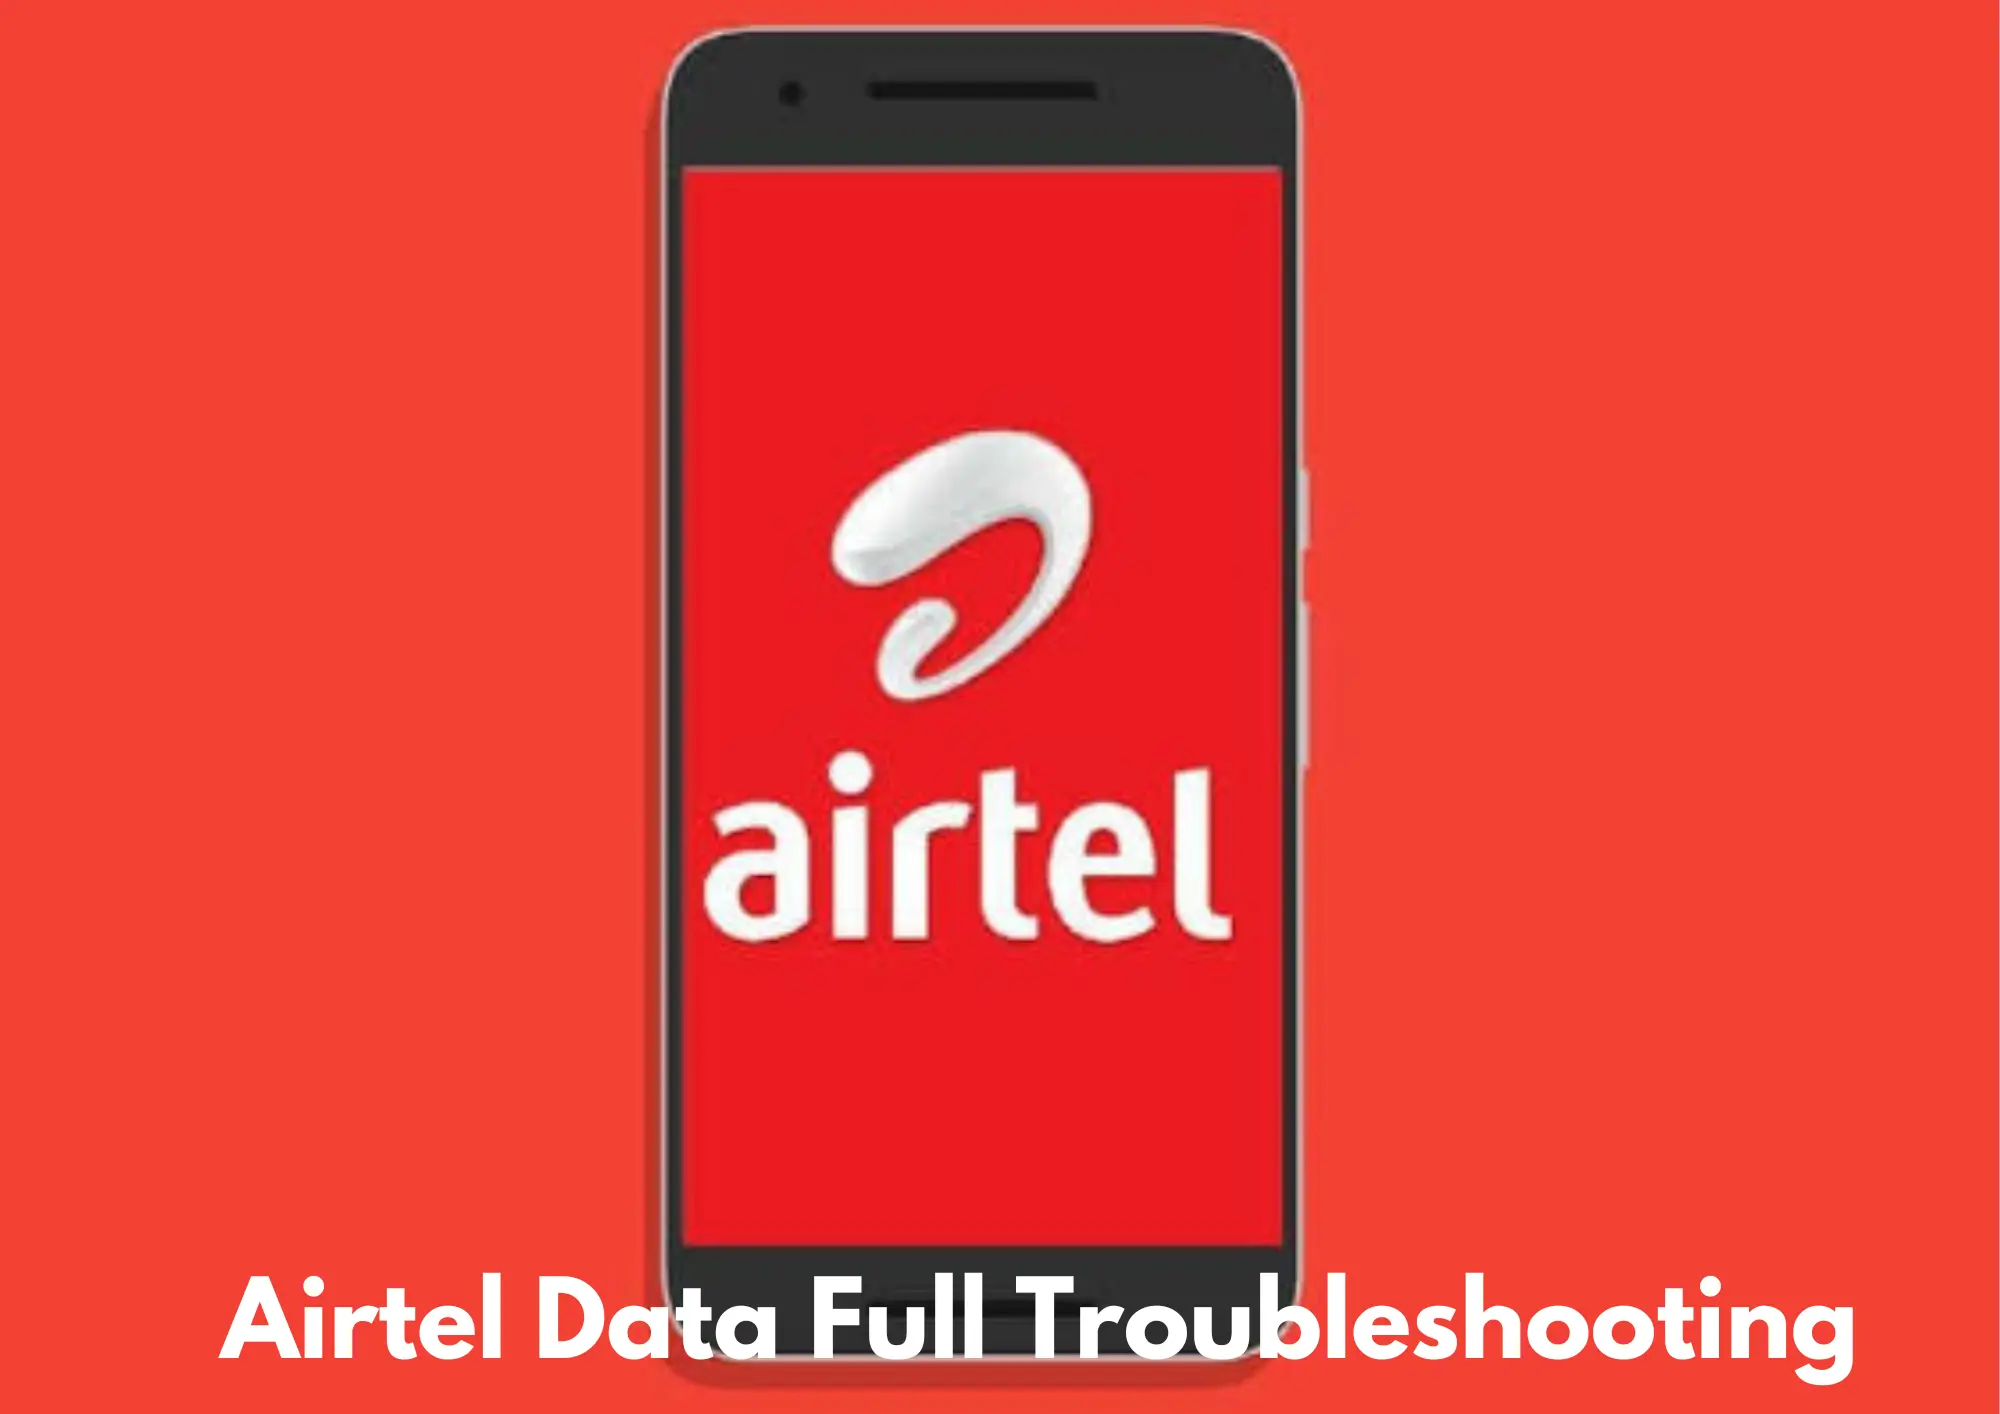 Airtel Data Full Troubleshooting Guide: Fixed! 